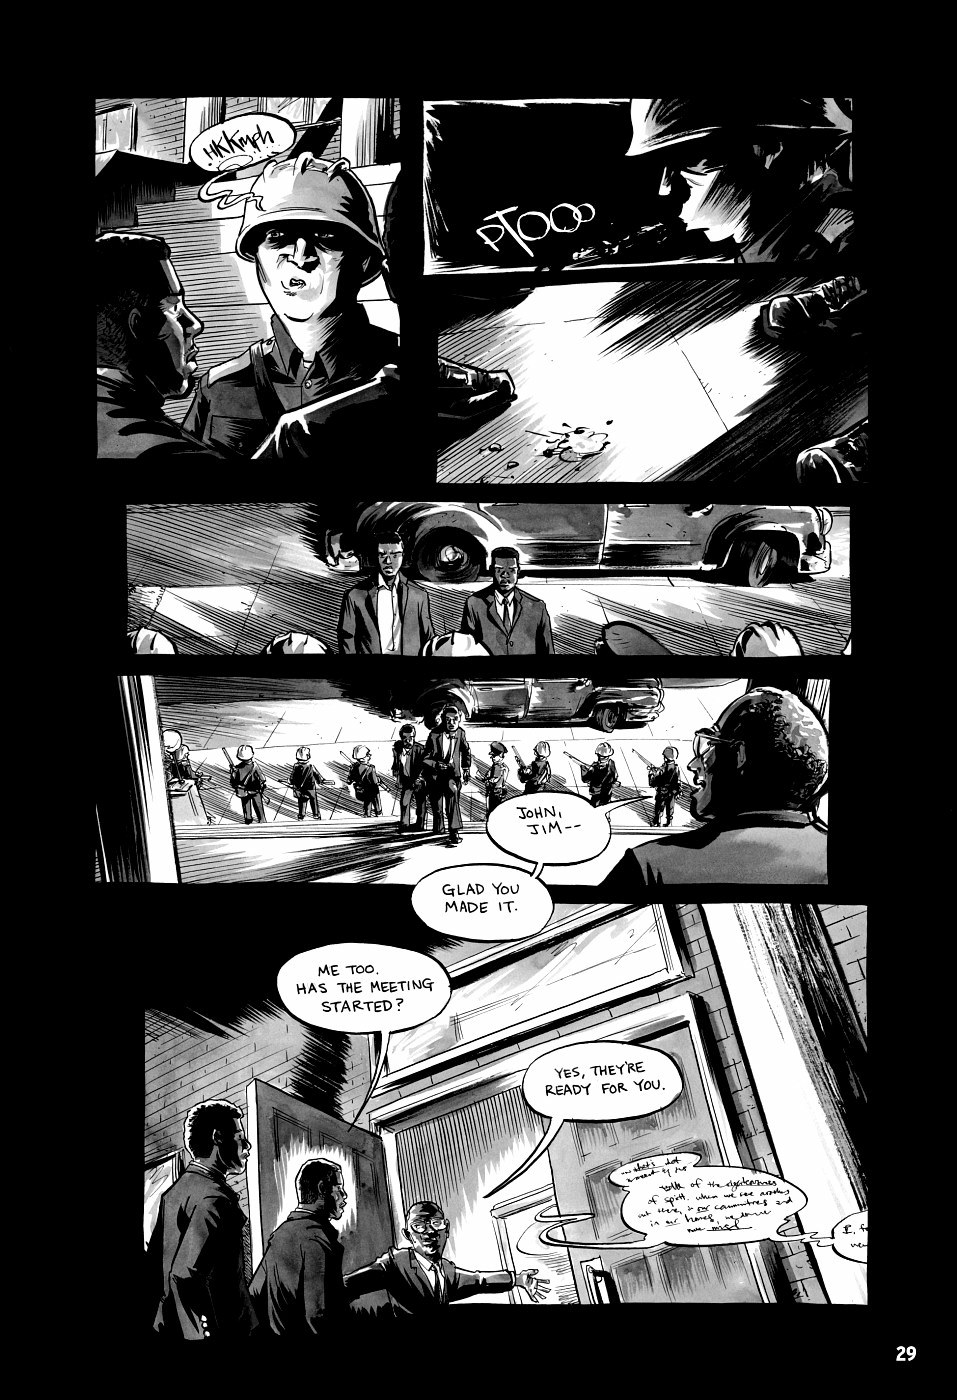 page 29 of march book three graphic novel